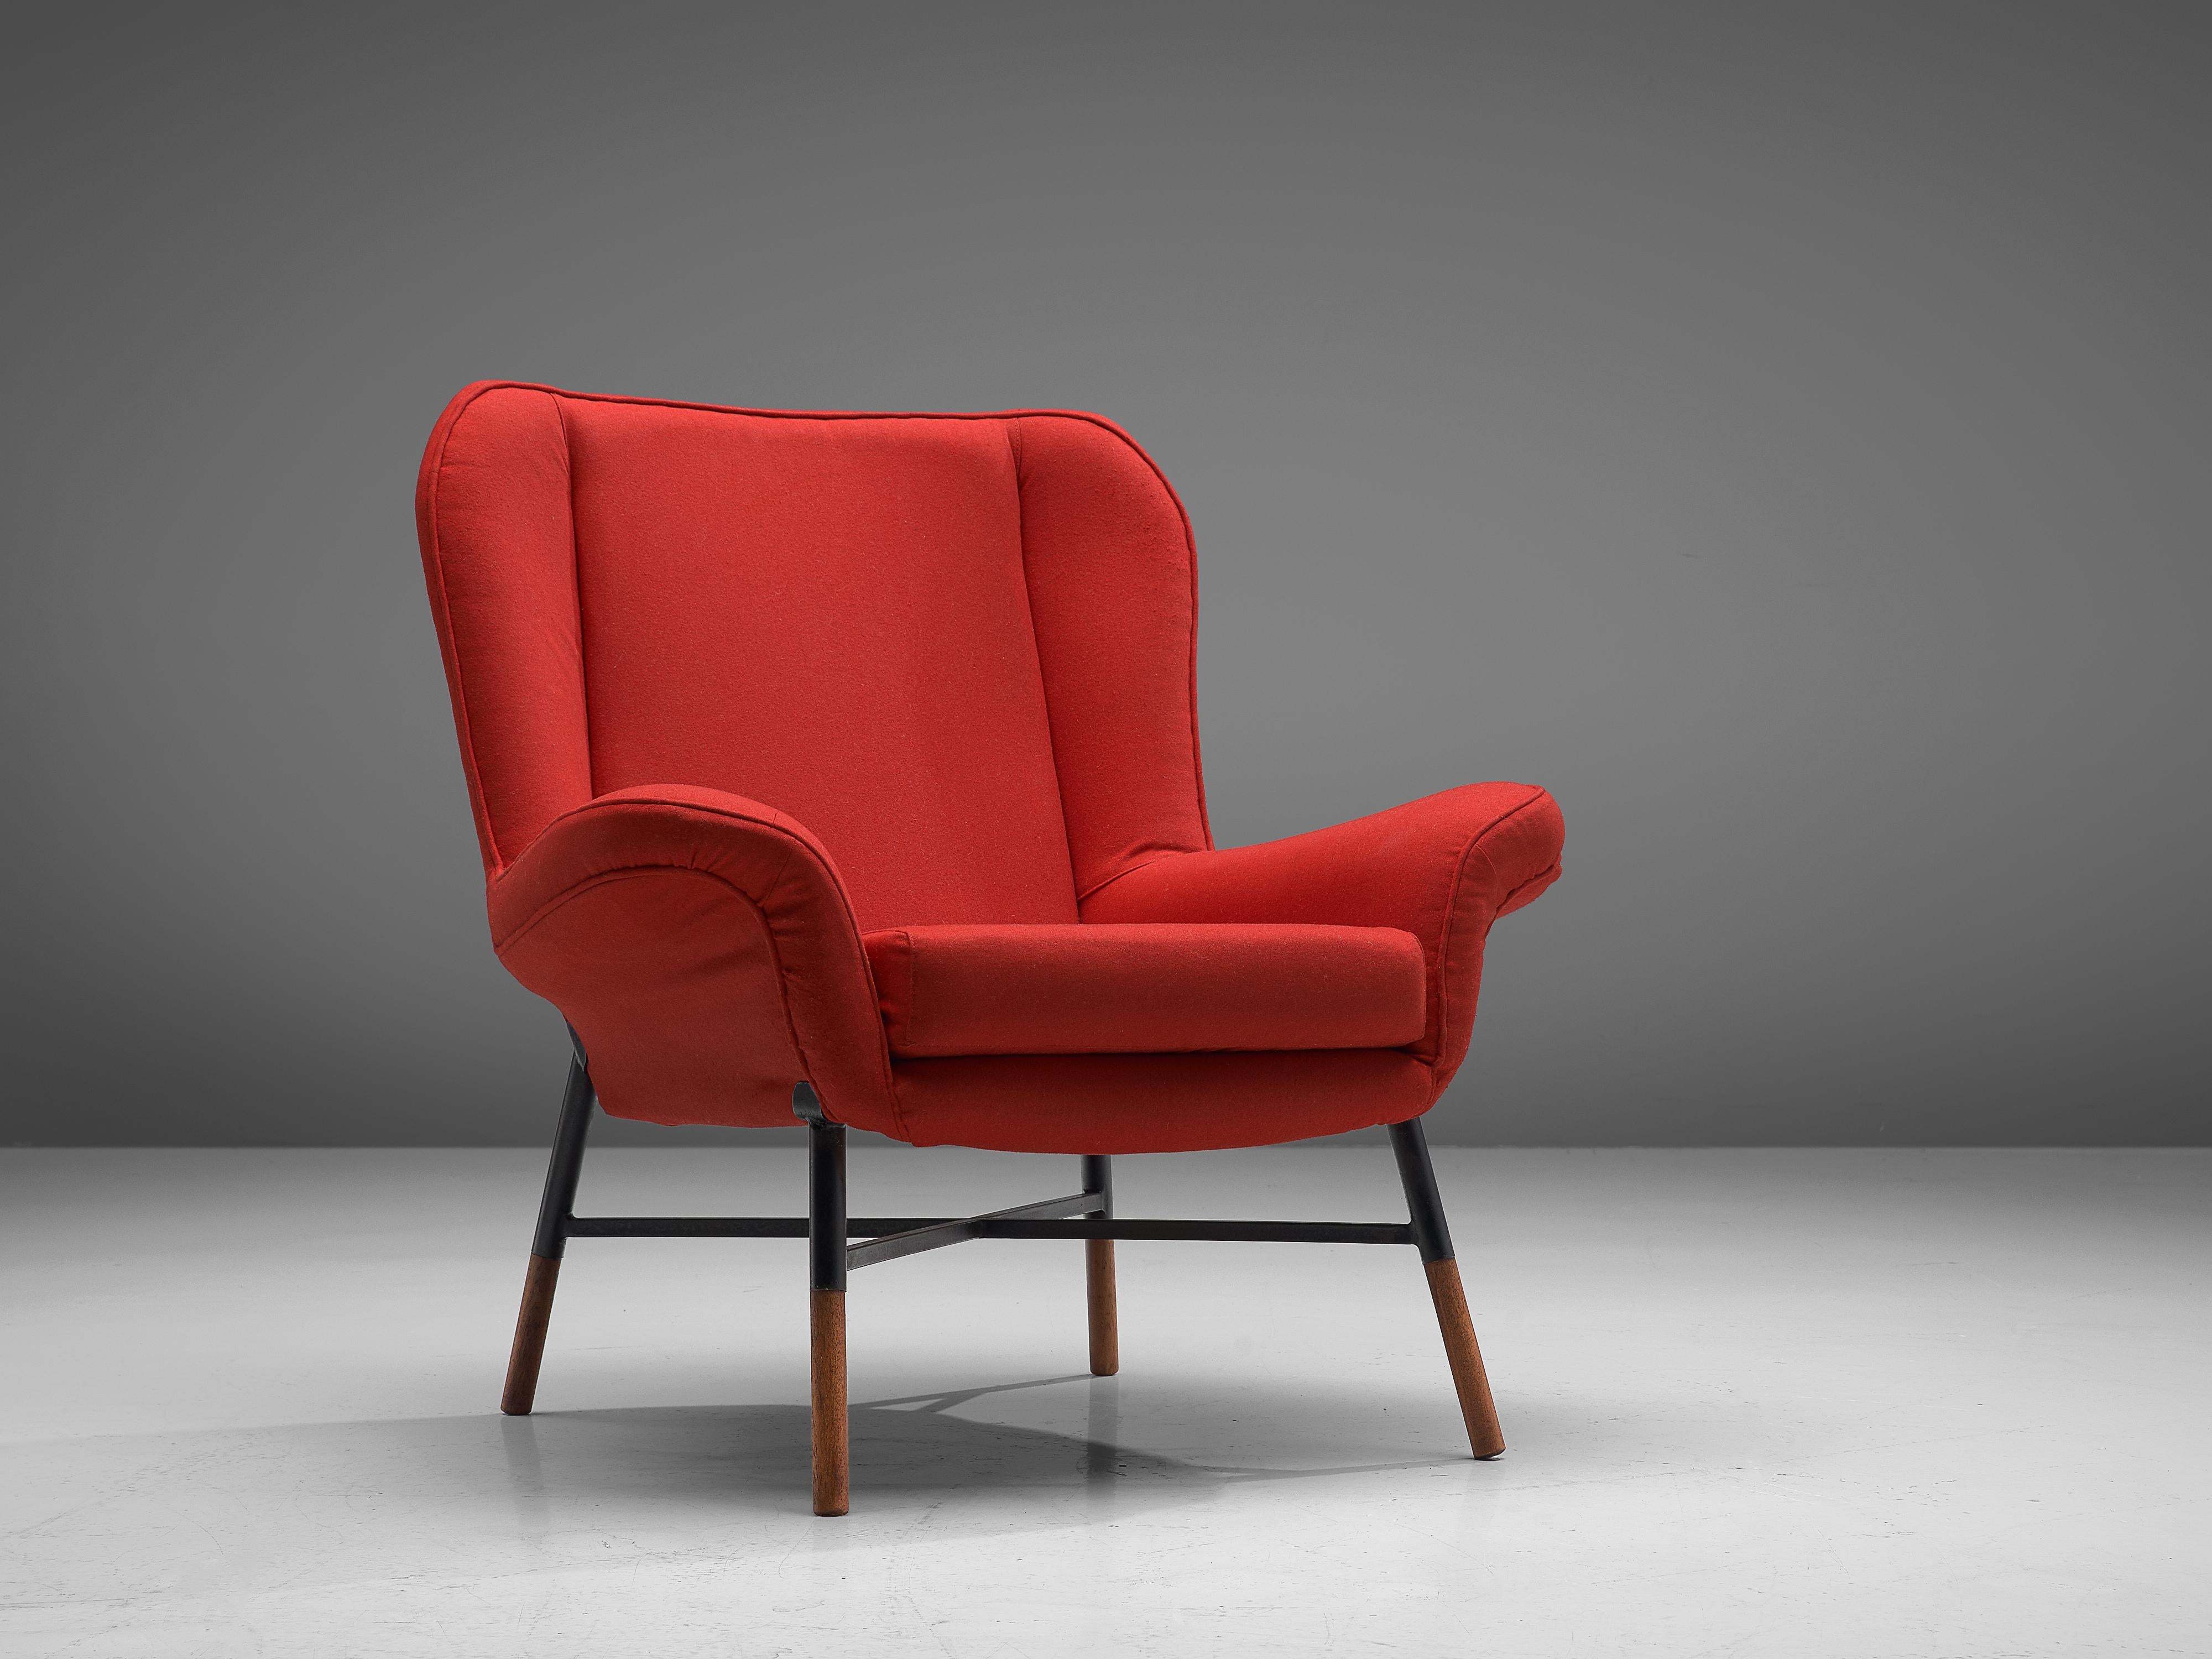 Studio BBPR for Arflex, 'Giulietta' lounge chair, red fabric, lacquered metal, wood, Italy, 1958

Begiojoso, Peressutti and Rogers of the B.B.P.R. design group designed this armchair named ‘Giulietta’ in 1958. The sculpted seat contains a high